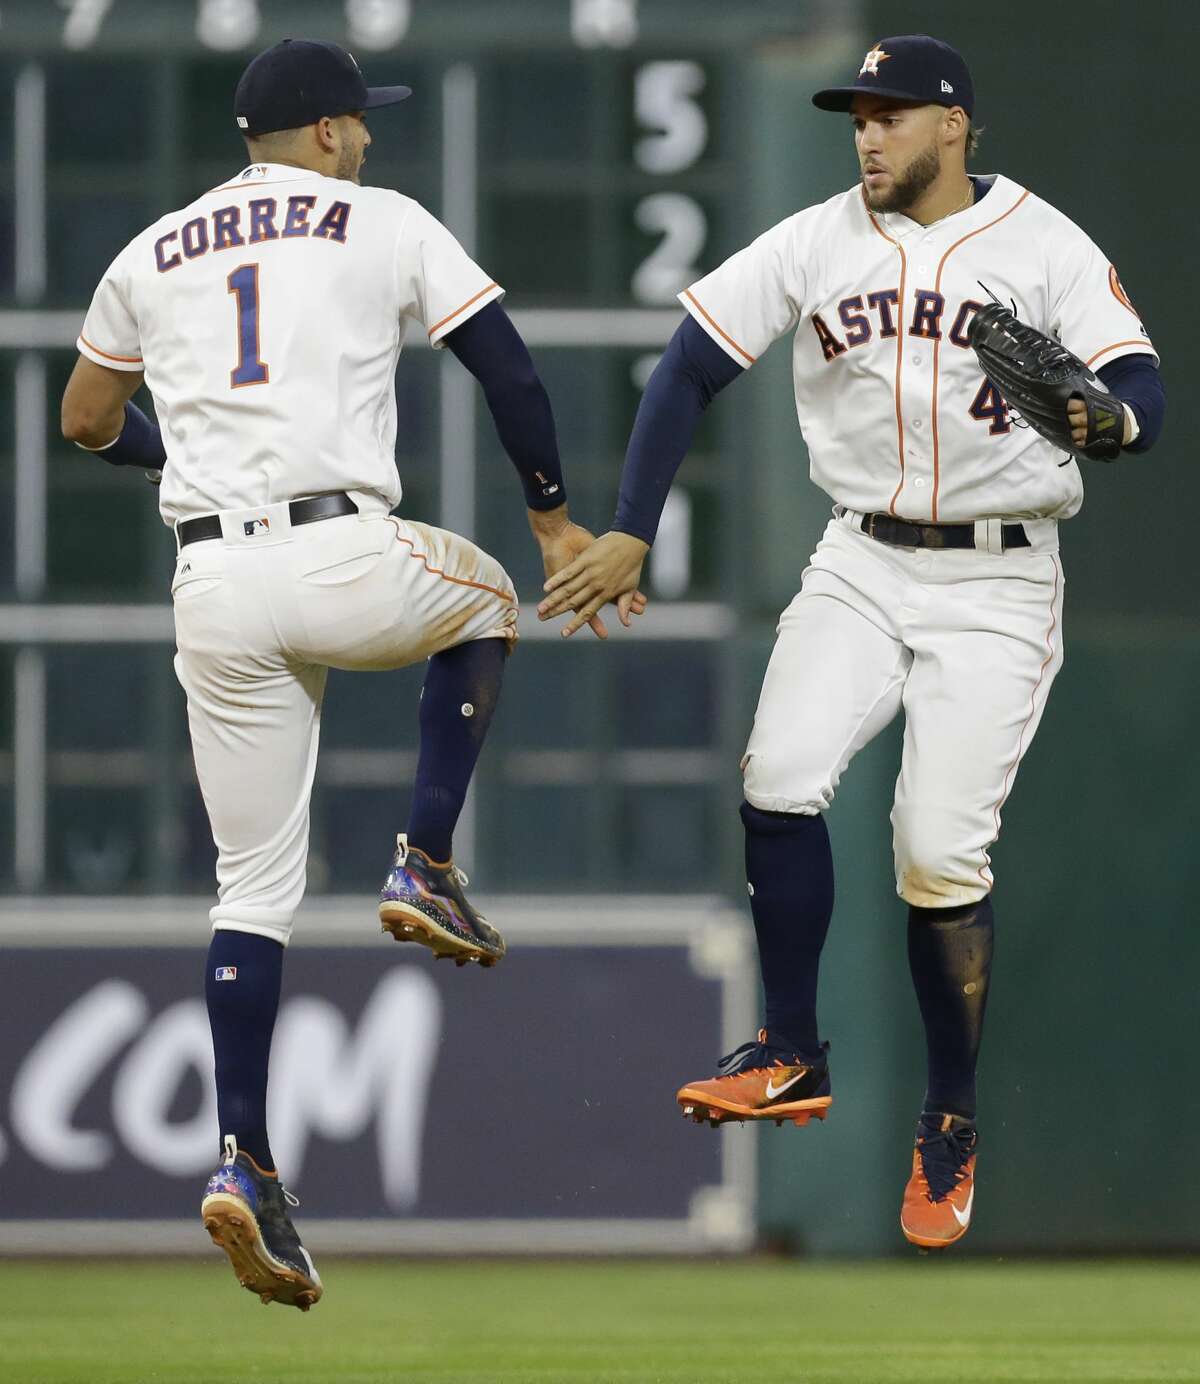 The early success enjoyed by Carlos Correa, George Springer and the Astros has led to a ratings bump for radio flagship KBME (790 AM).